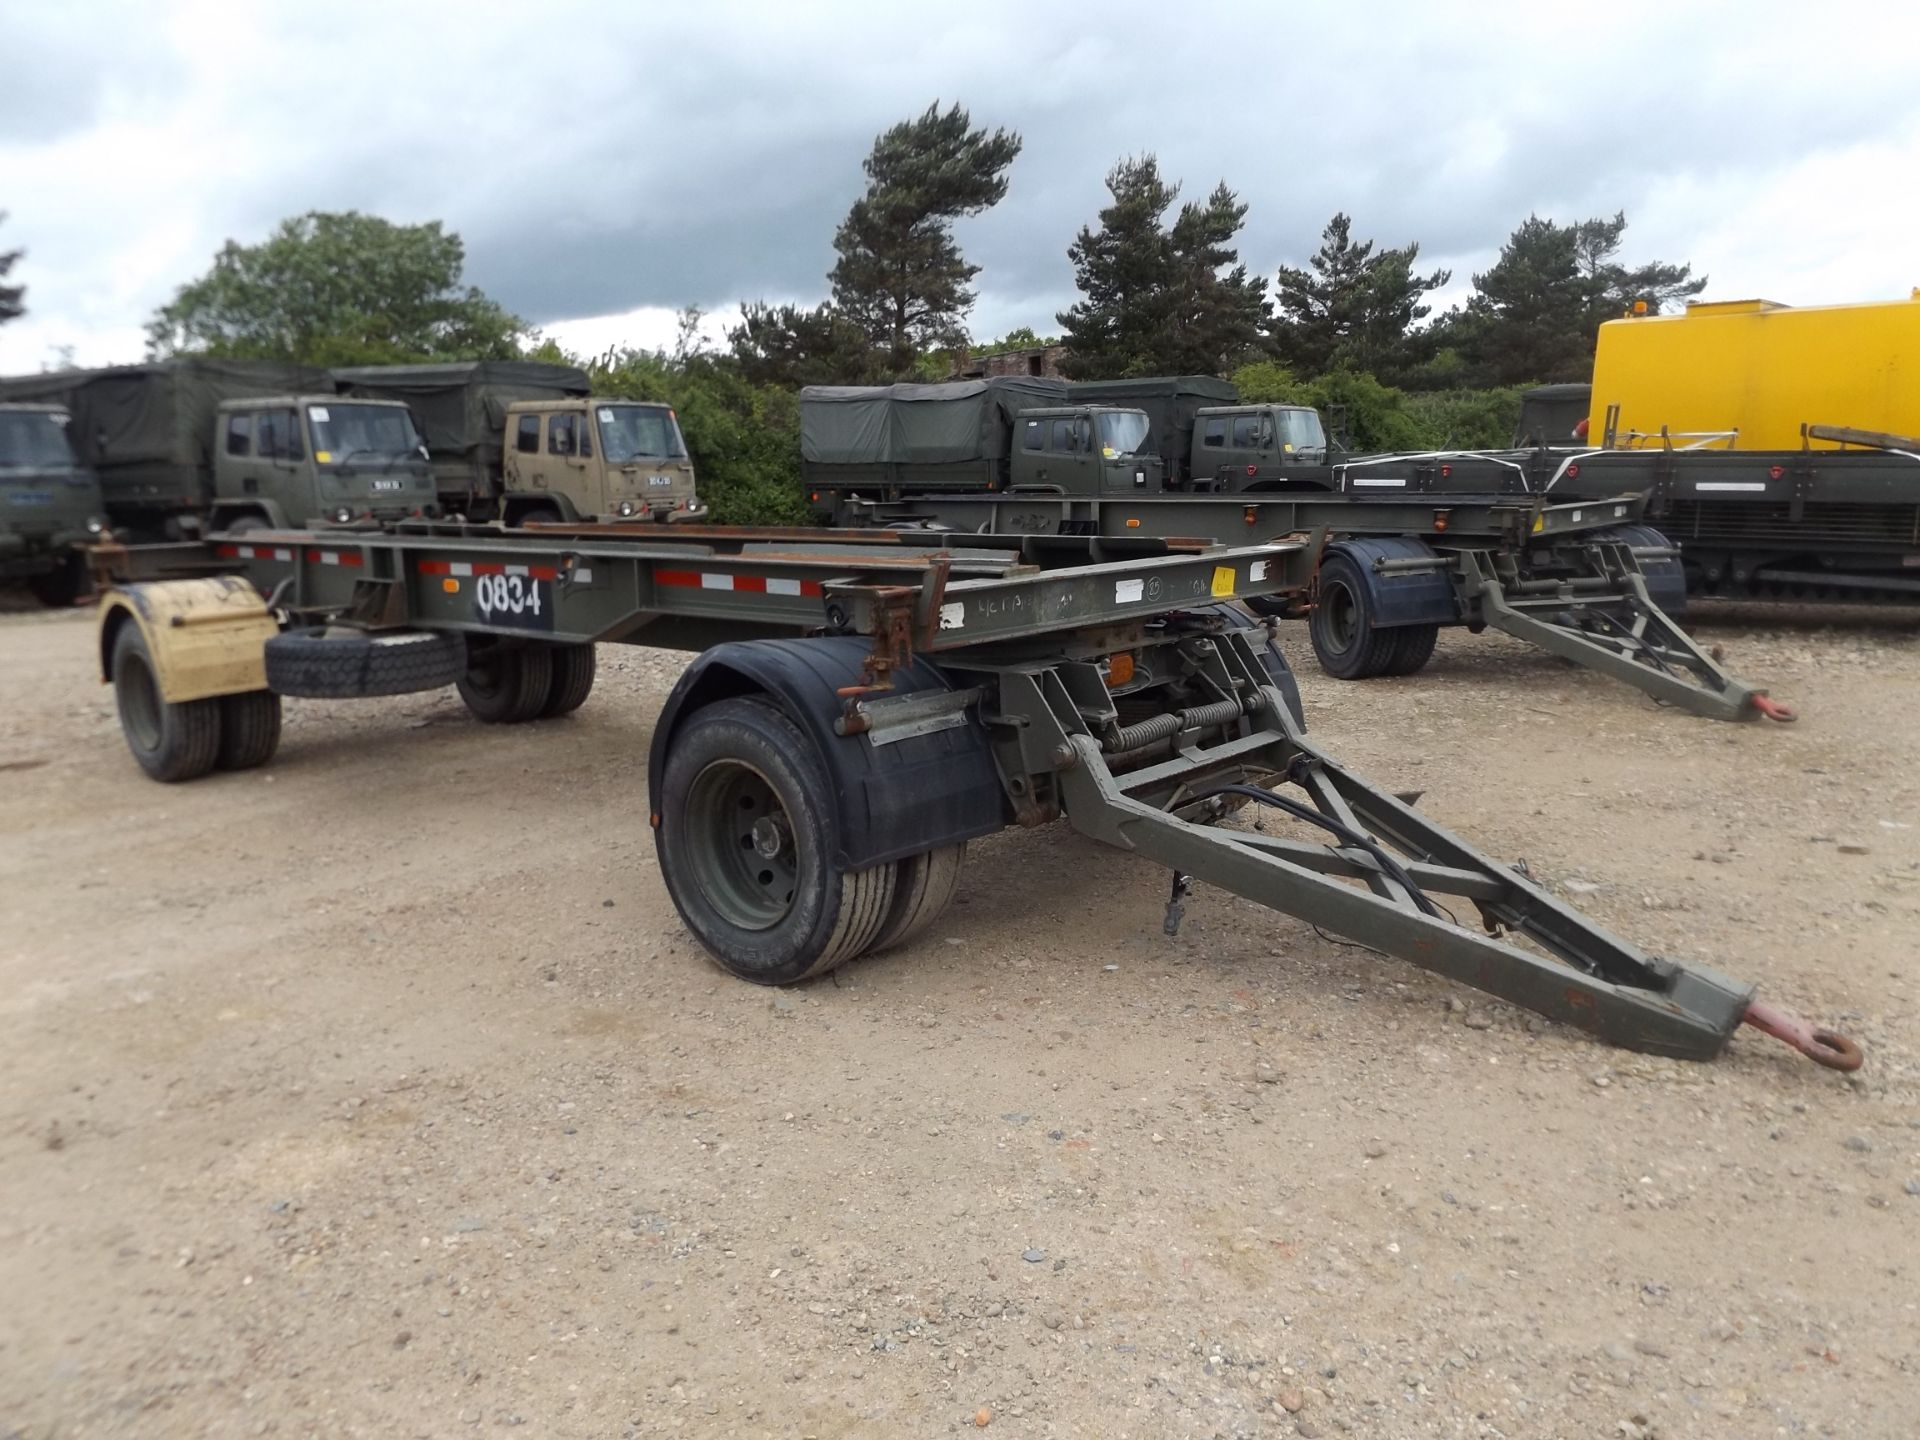 King DB 2 Axle 15 Tonne Skeletal drops/skip/container Trailer